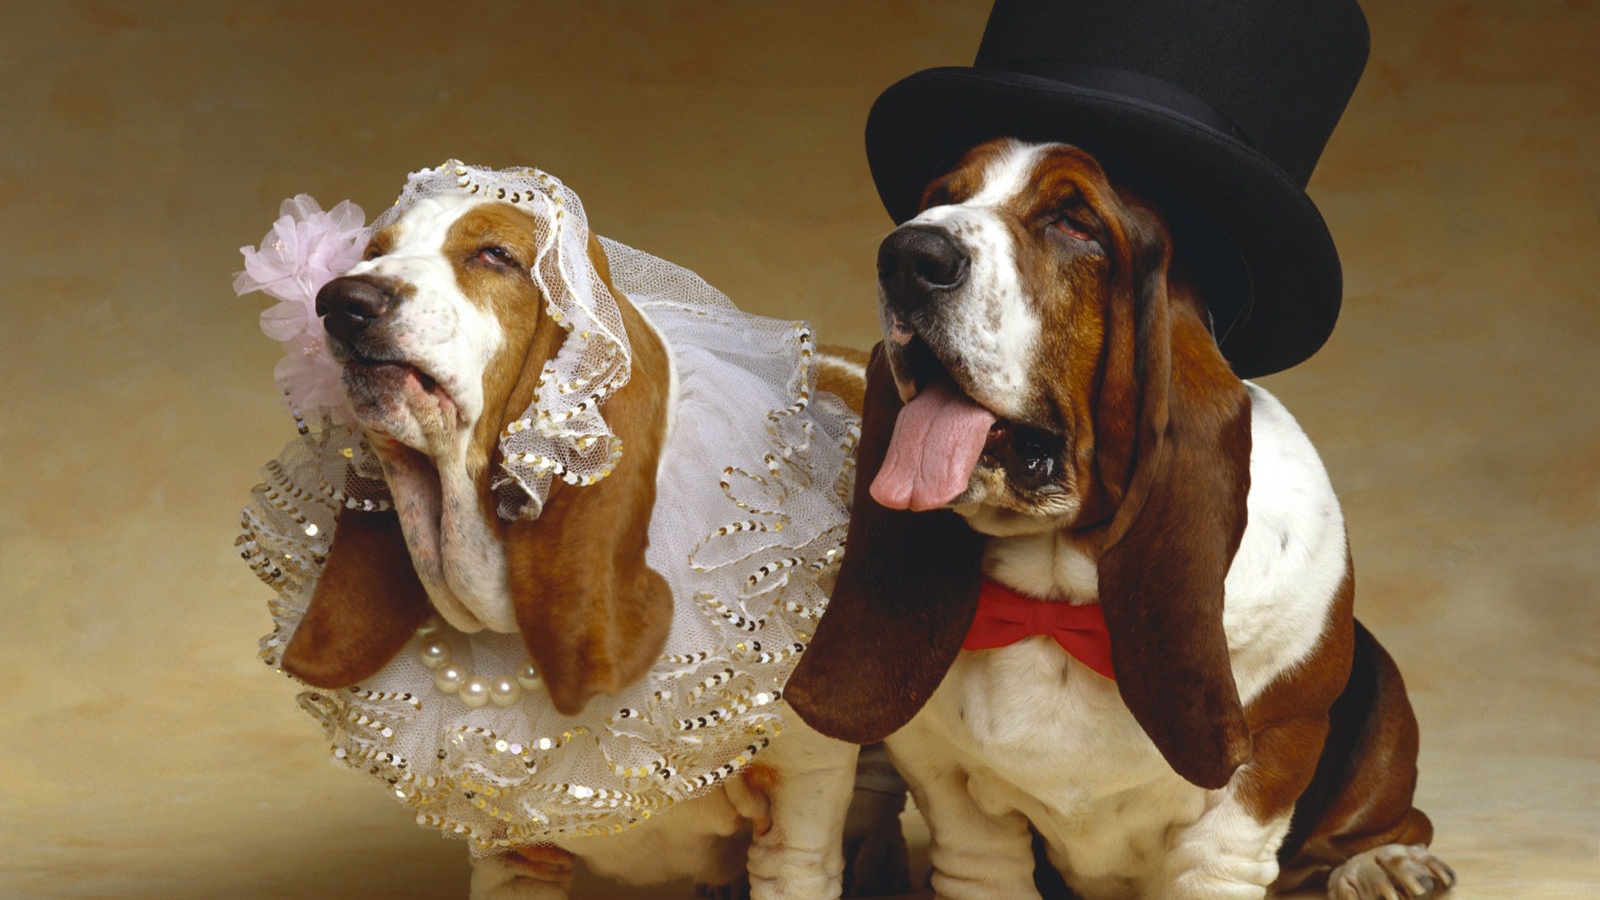 Basset Hound, the bride and groom